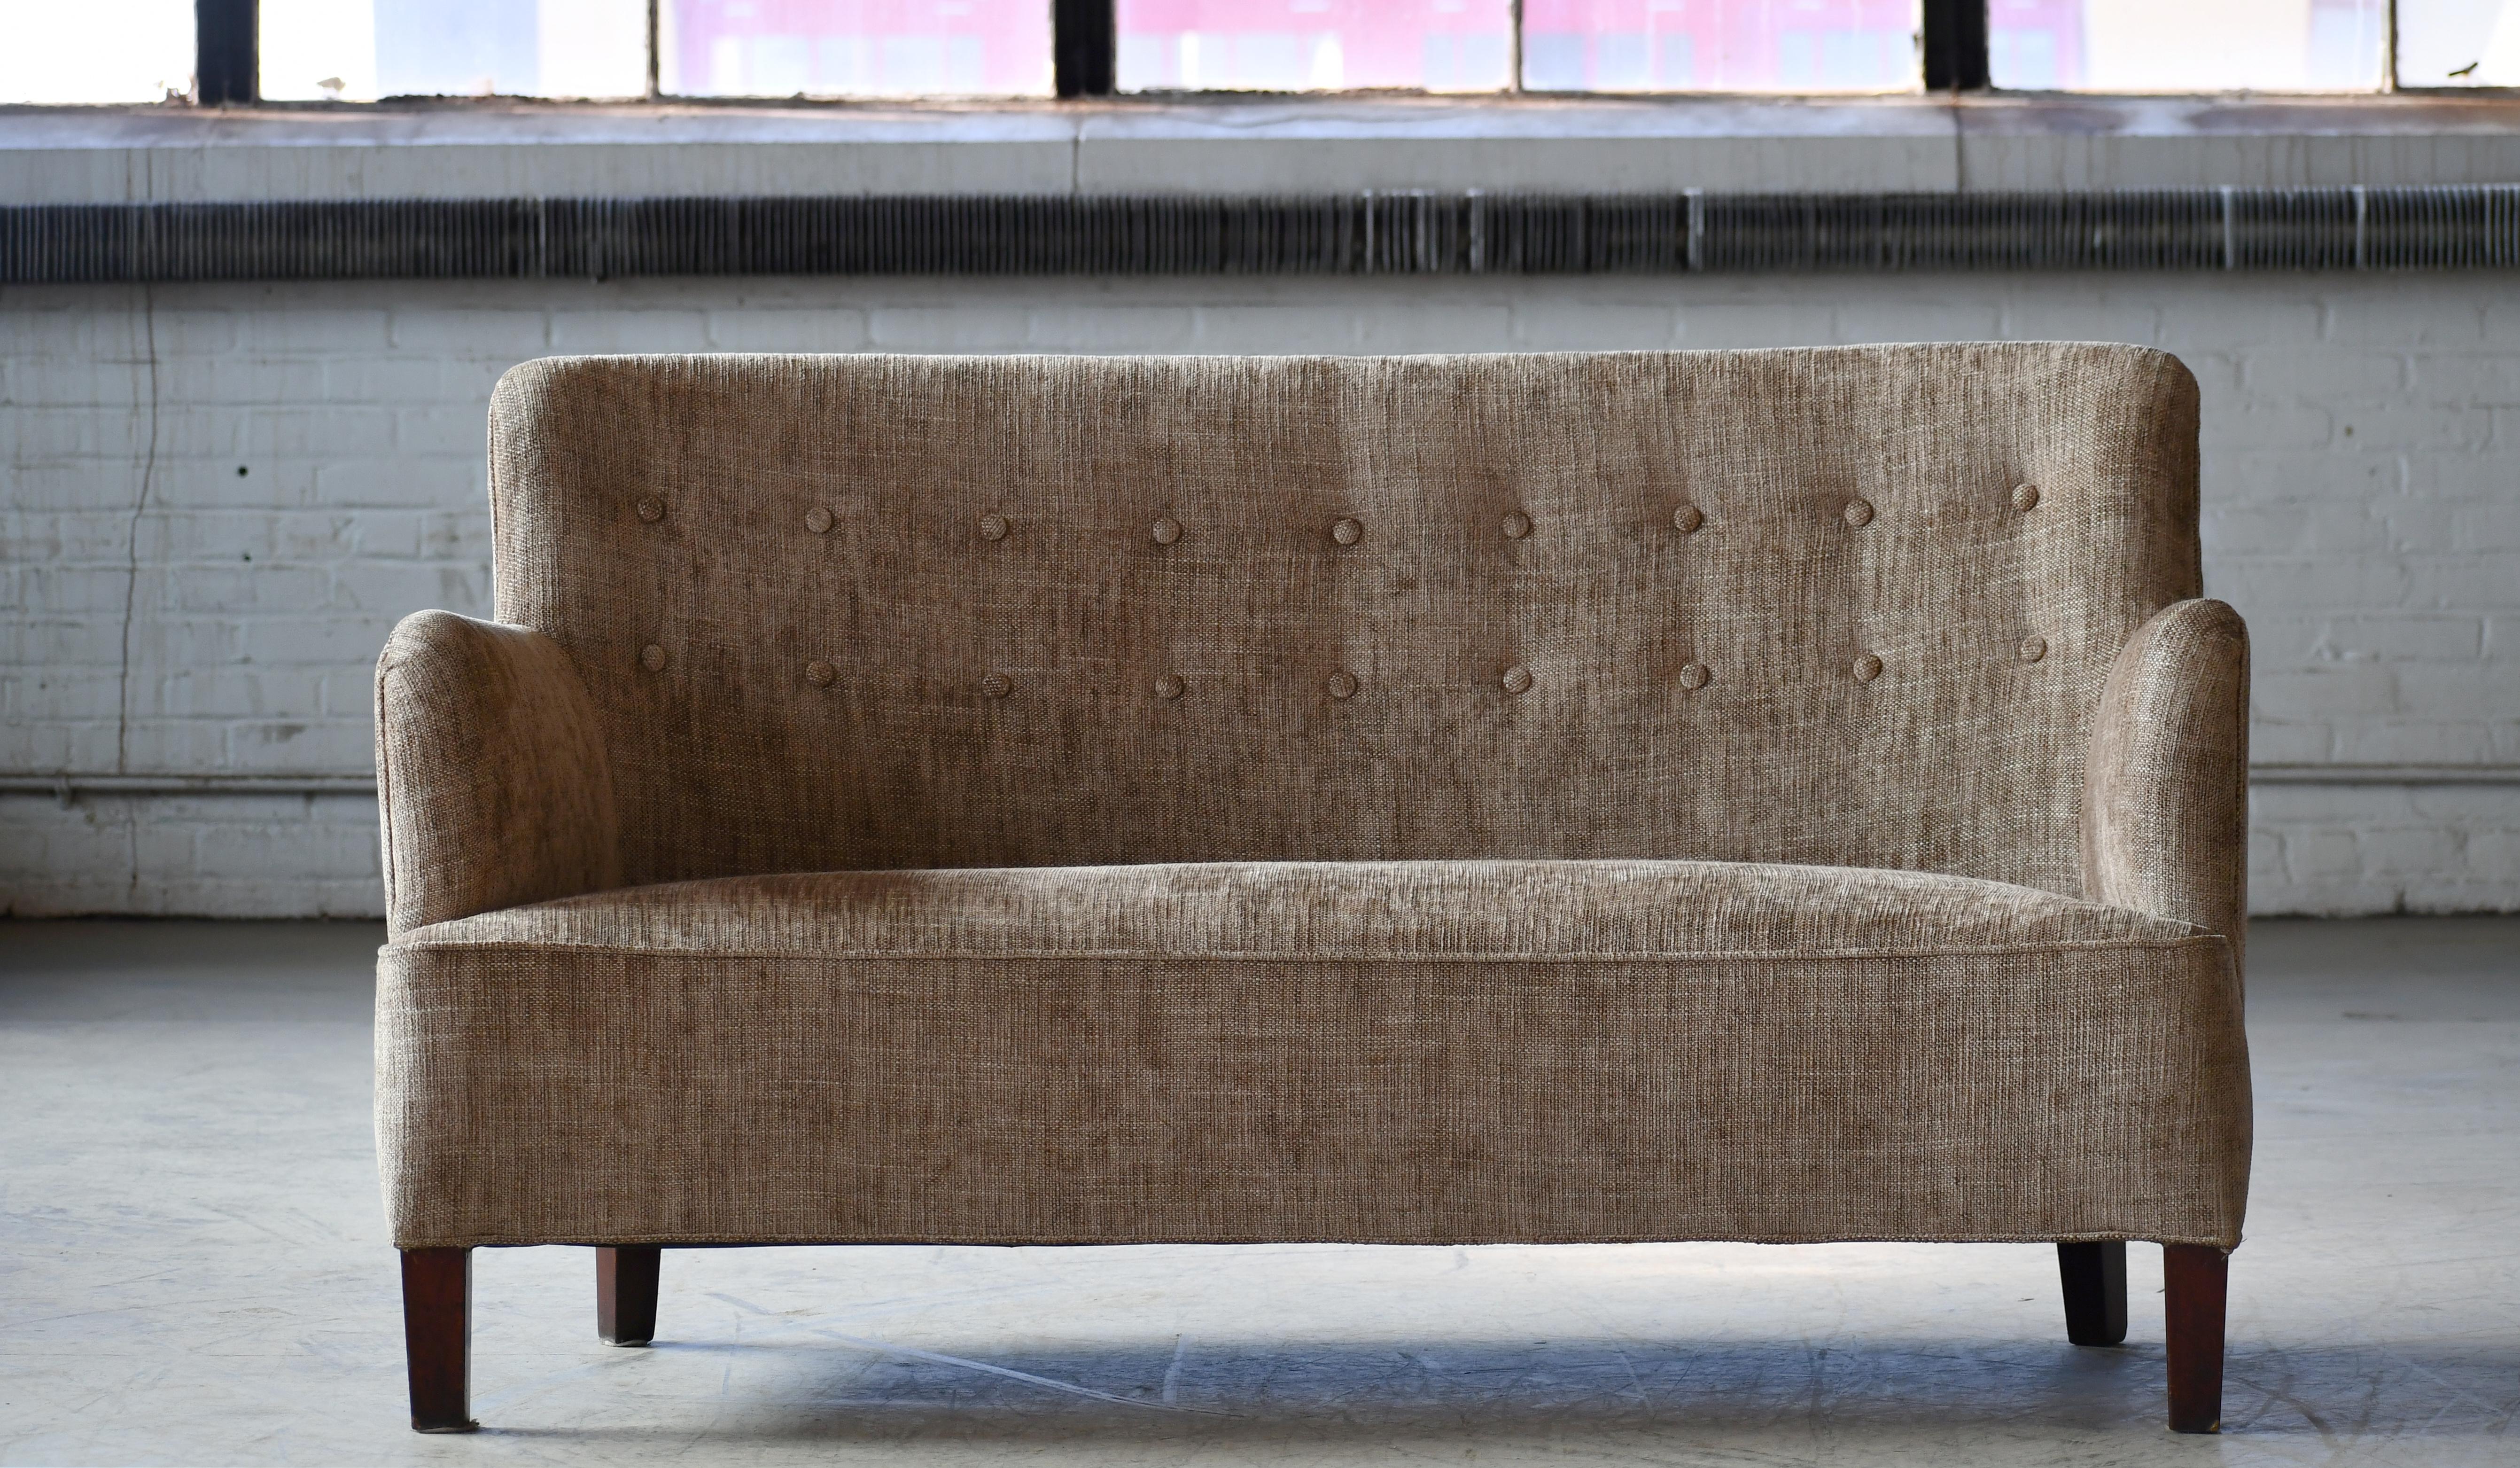 Very elegant small sofa or settee made around 1940 in Denmark. it is very much in the style of Master Carpenter Georg Kofoed but Designer and maker is unknown to us. Beautiful curved shape with a short backrest and high armrests calling for a very